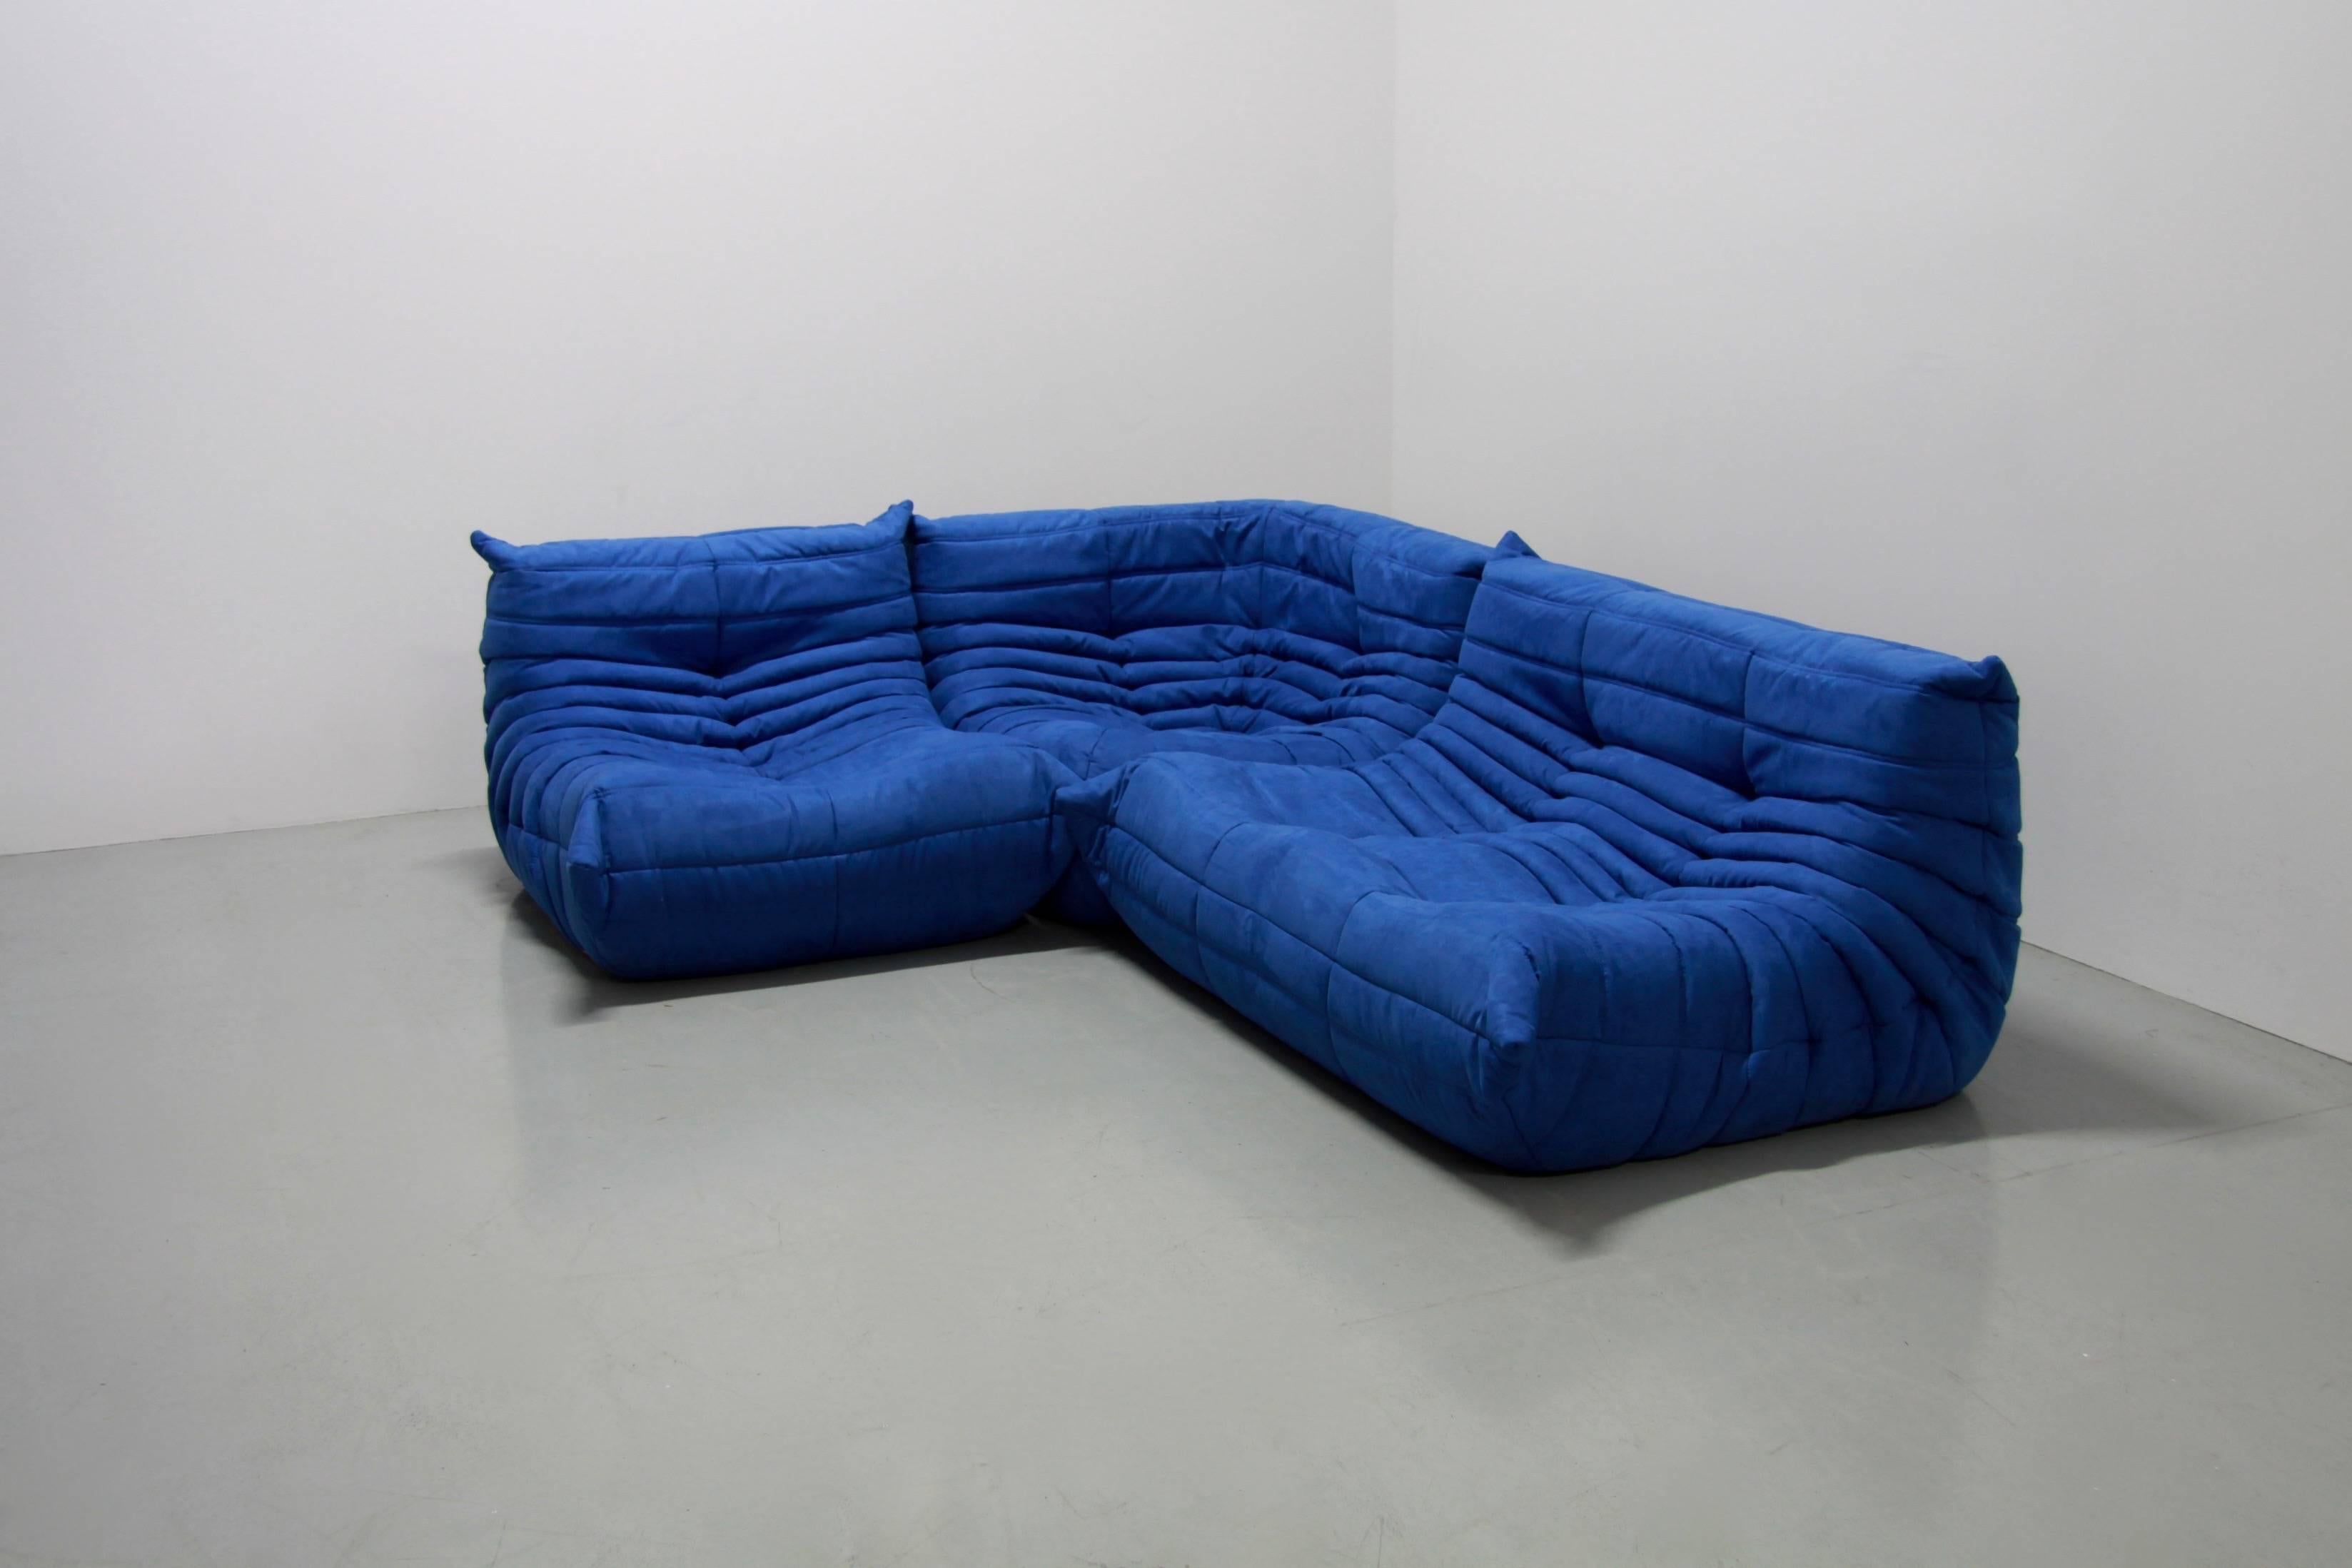 This Togo living room set was designed by Michel Ducaroy in 1970s and was manufactured by Ligne Roset in France. It has been reupholstered in blue high quality Italvelutti microfibre and is made up of the following pieces, each with the original